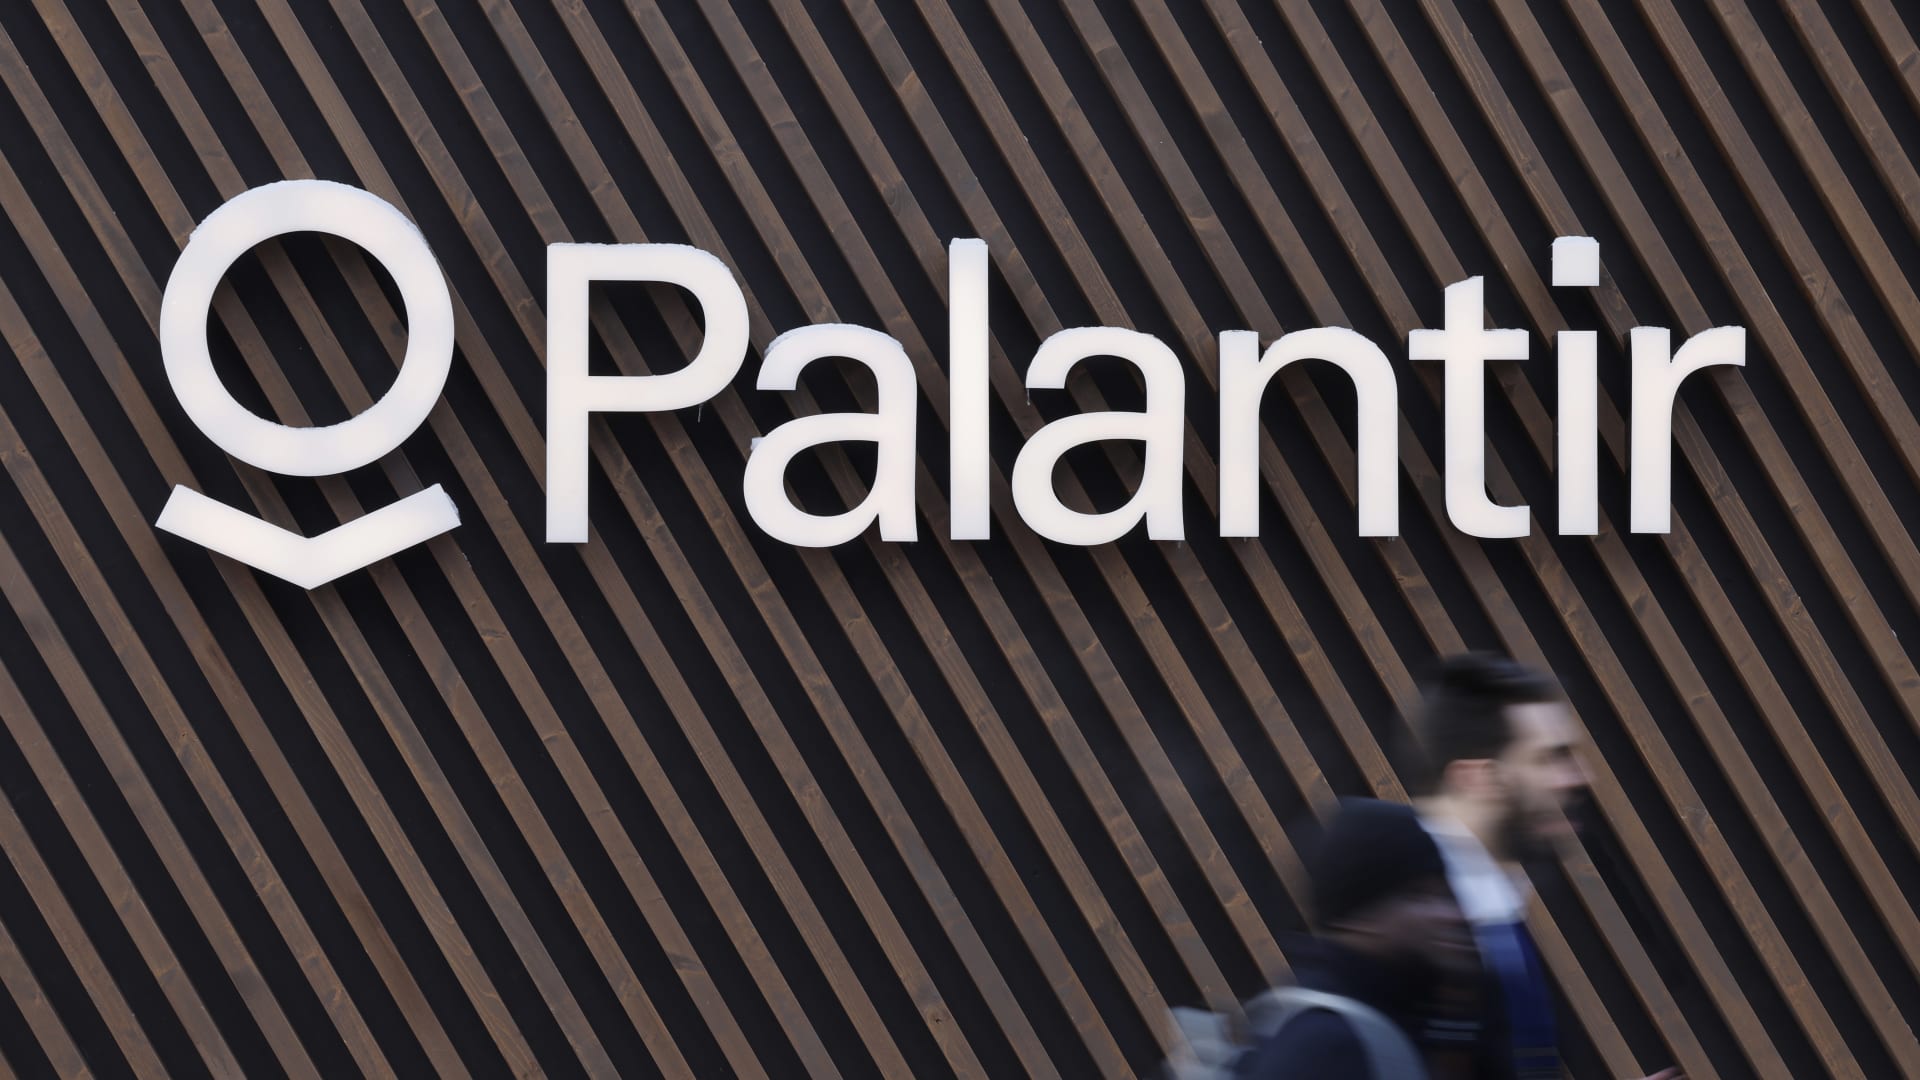 Stocks making the biggest moves after hours: Palantir Technologies, NXP Semiconductors, Chegg and more